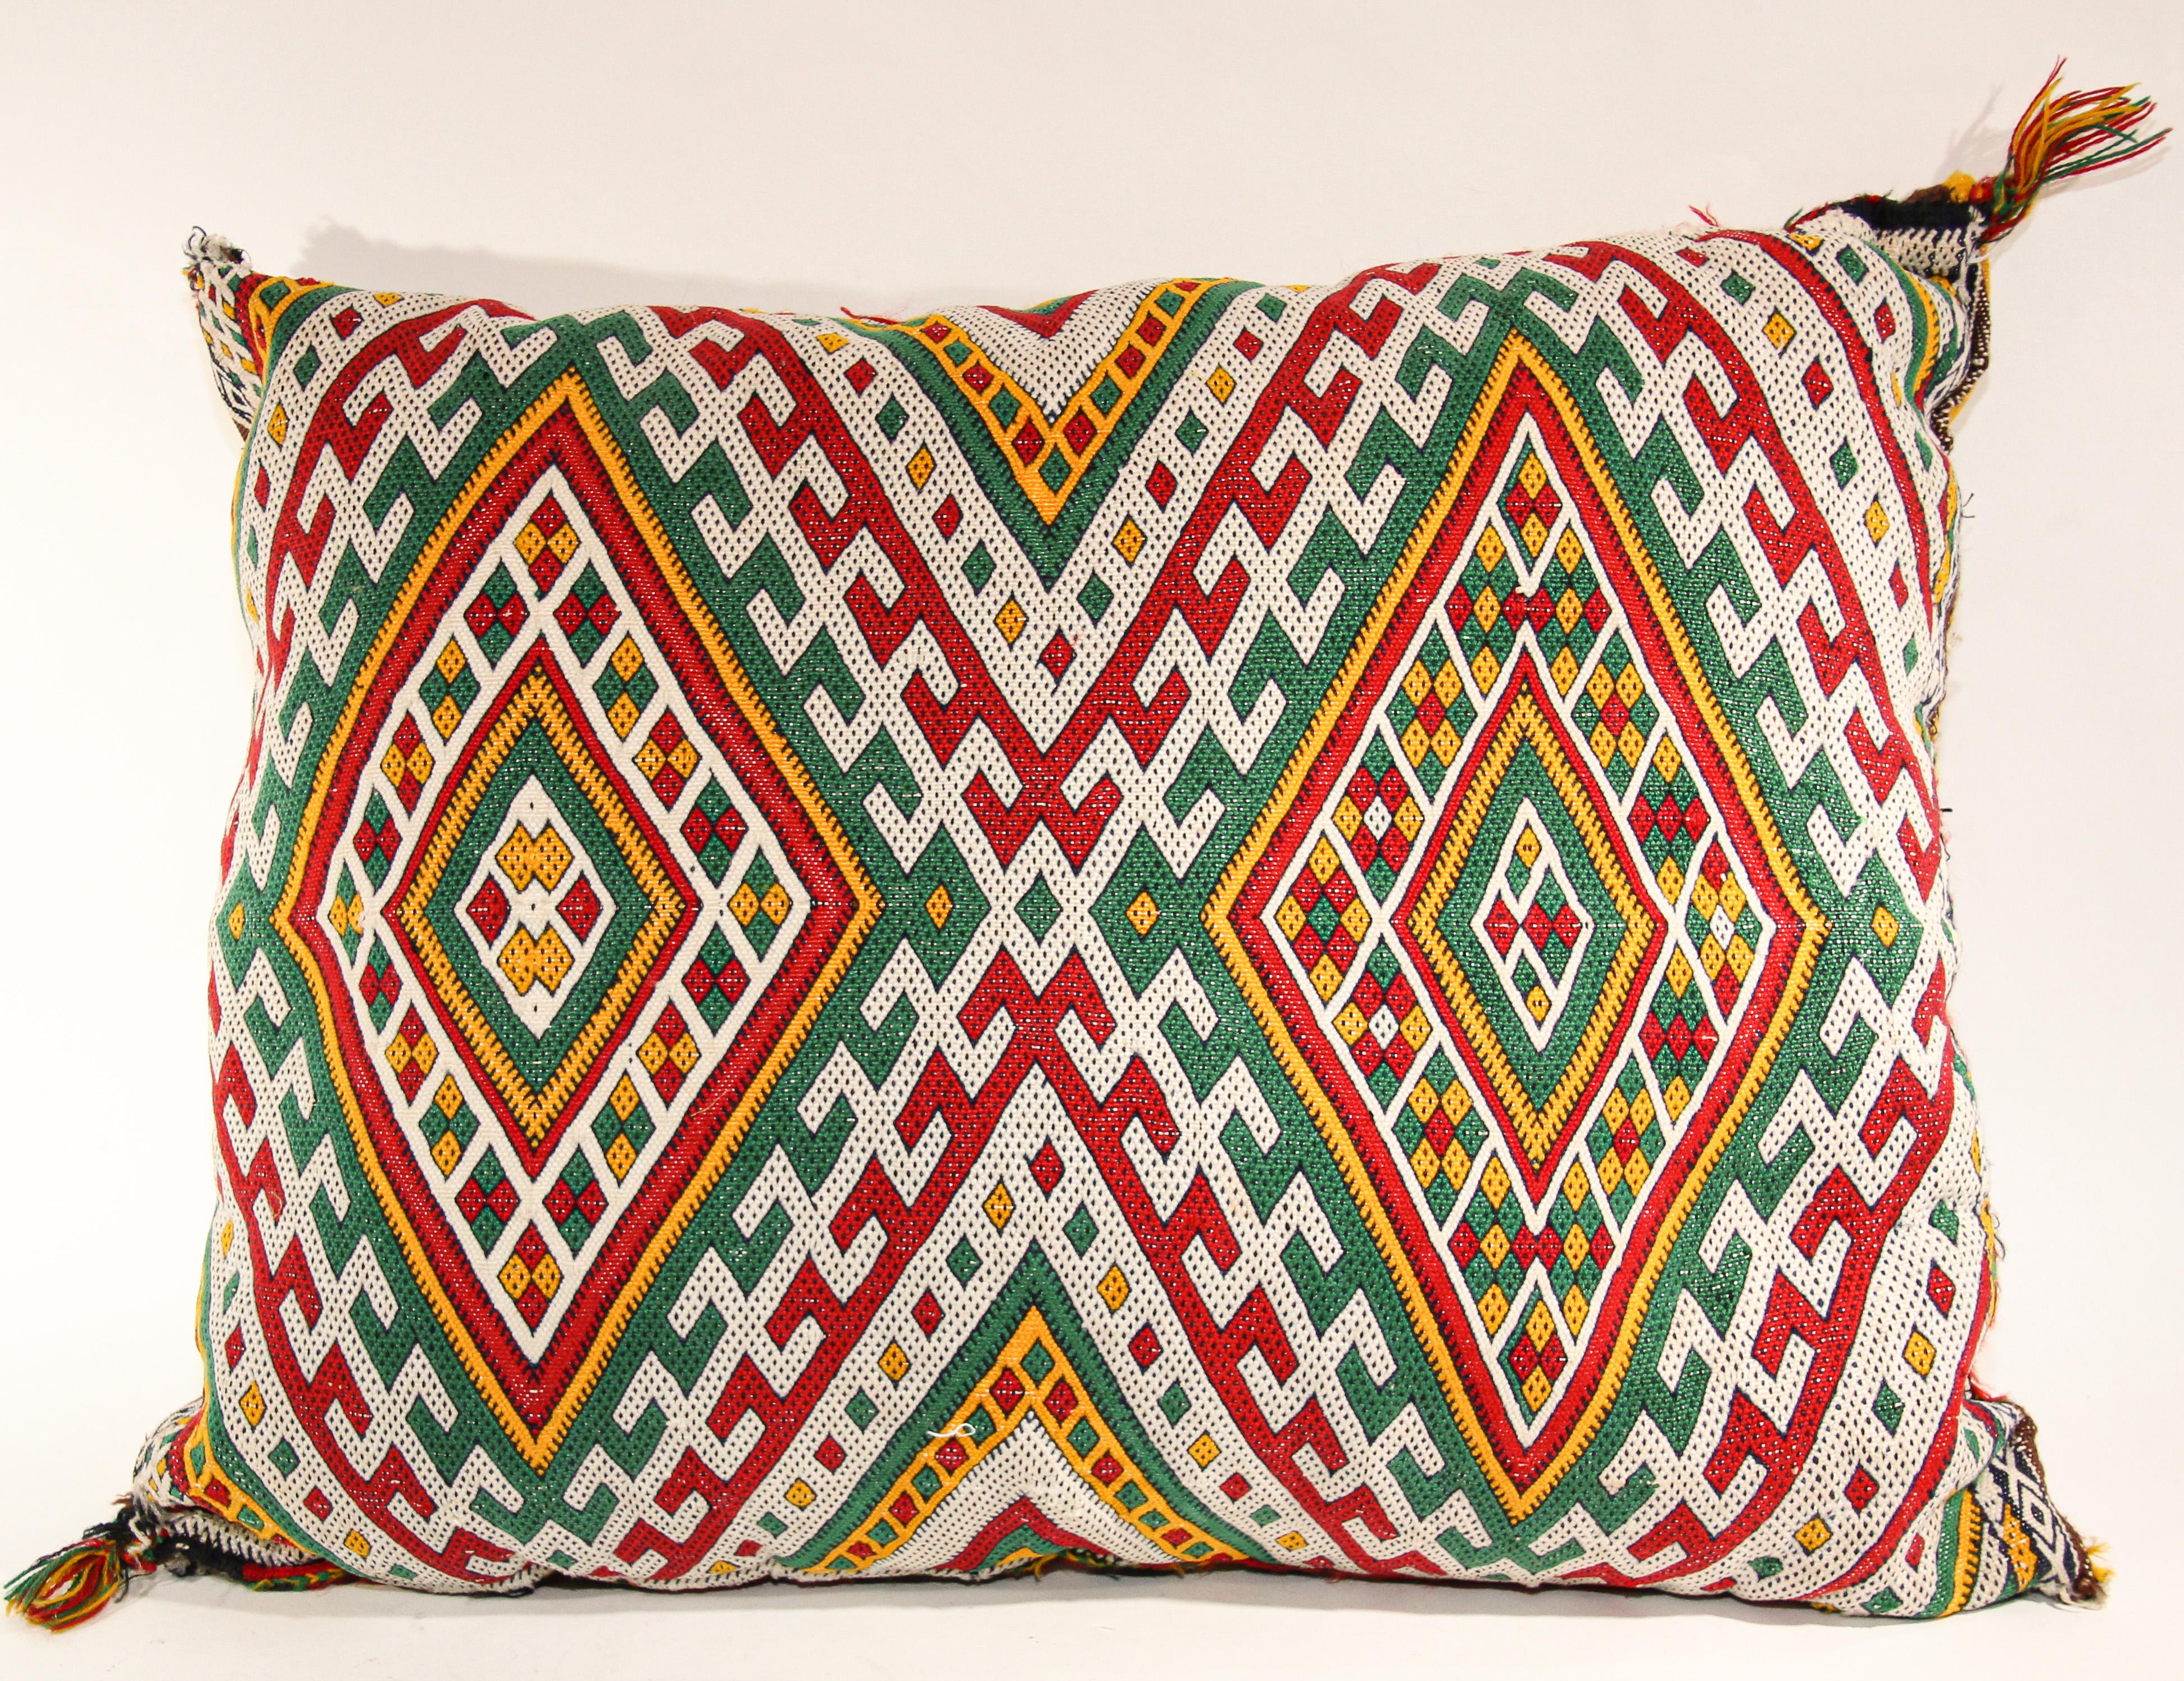 Moroccan Berber ethnic handwoven tribal throw pillow made from a vintage rug.
The front and the back are made from a different rug, front is more elaborate and back is more plain.
Geometric North African tribal designs in red, white and black and